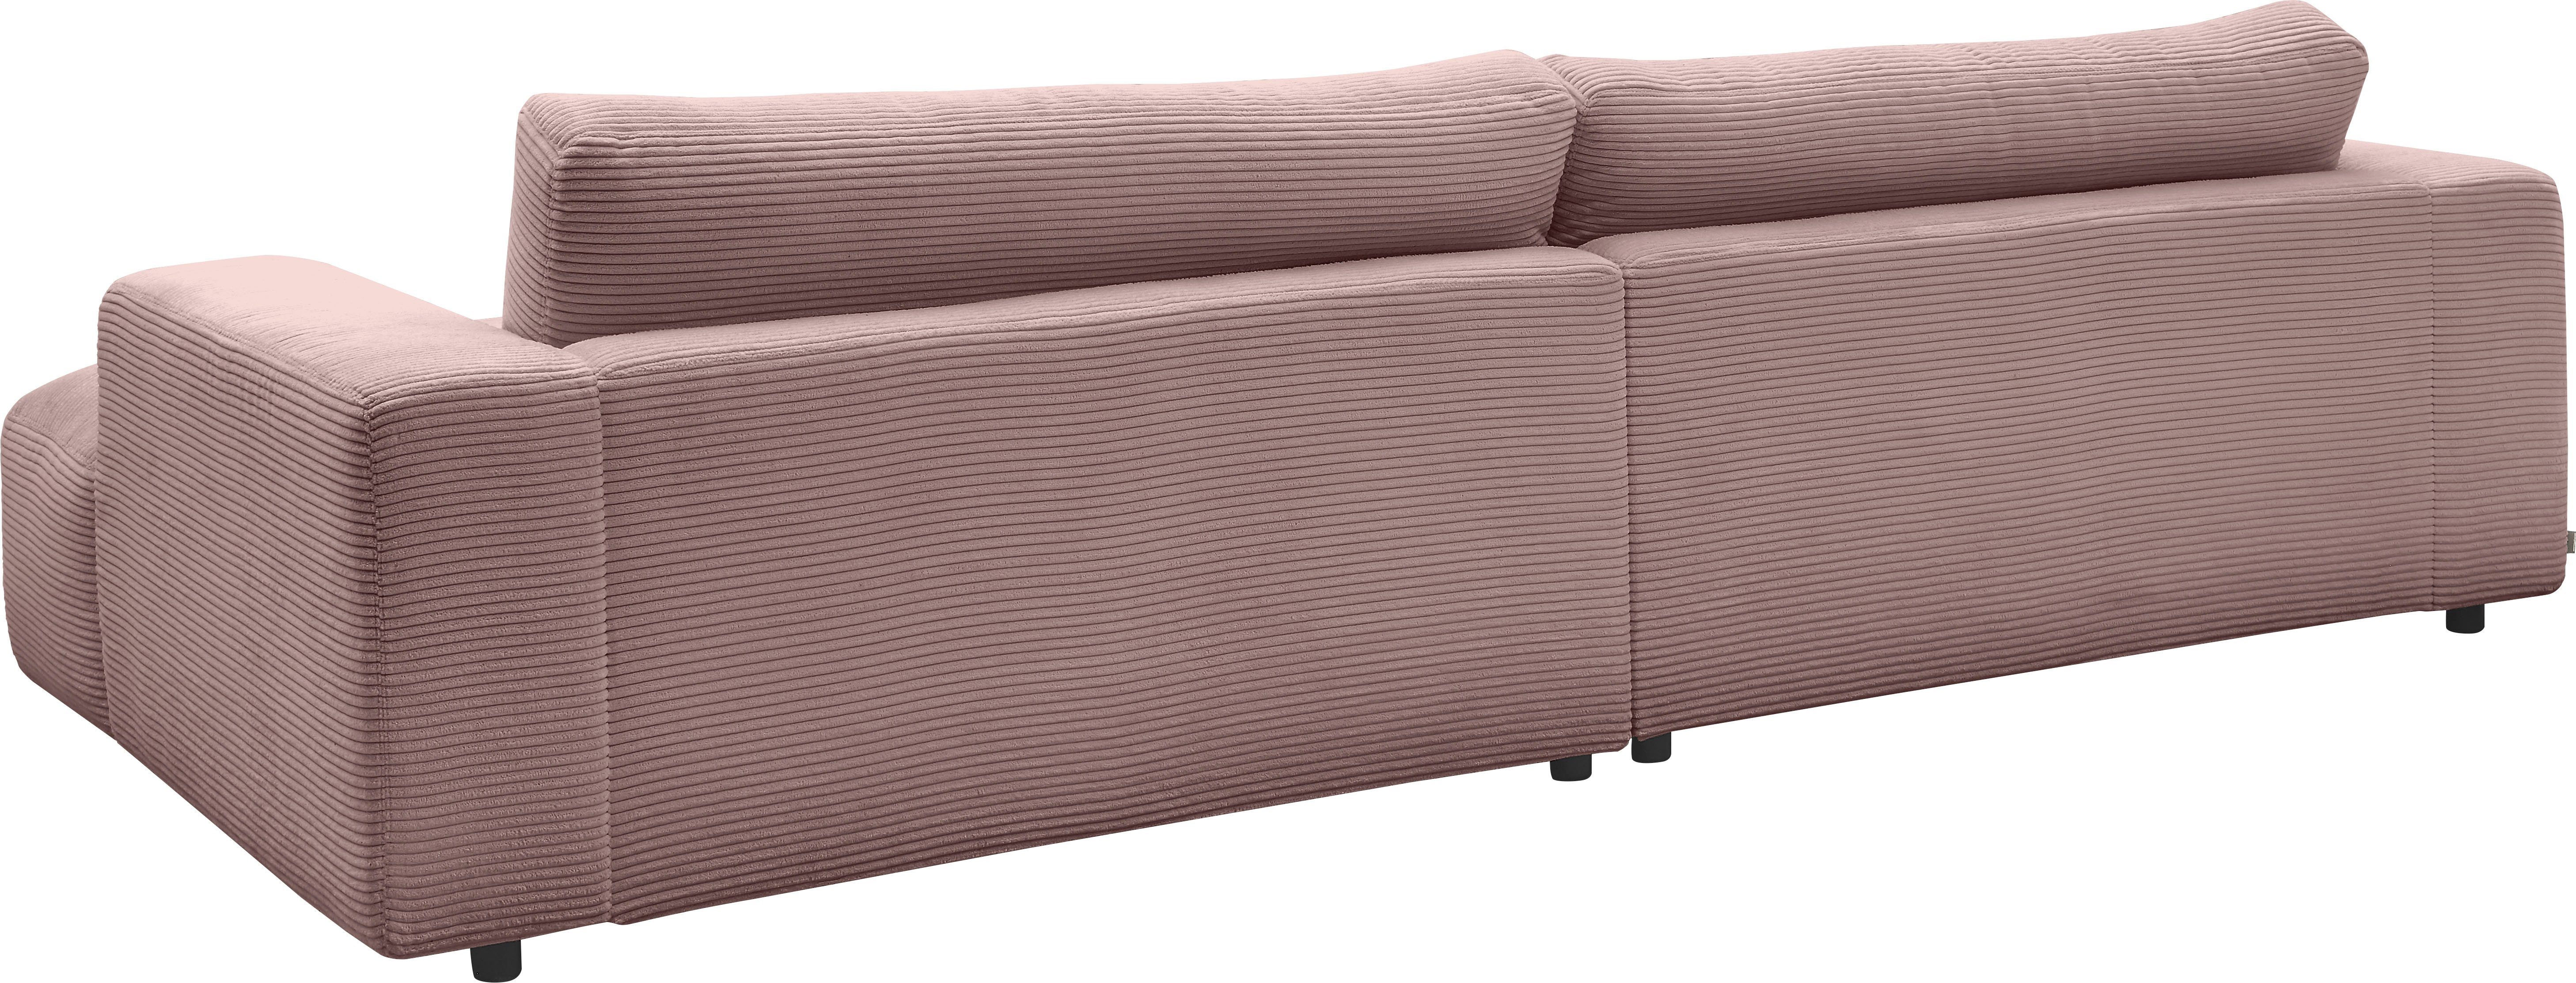 GALLERY M cm branded 292 by Cord-Bezug, Lucia, rosa Musterring Loungesofa Breite